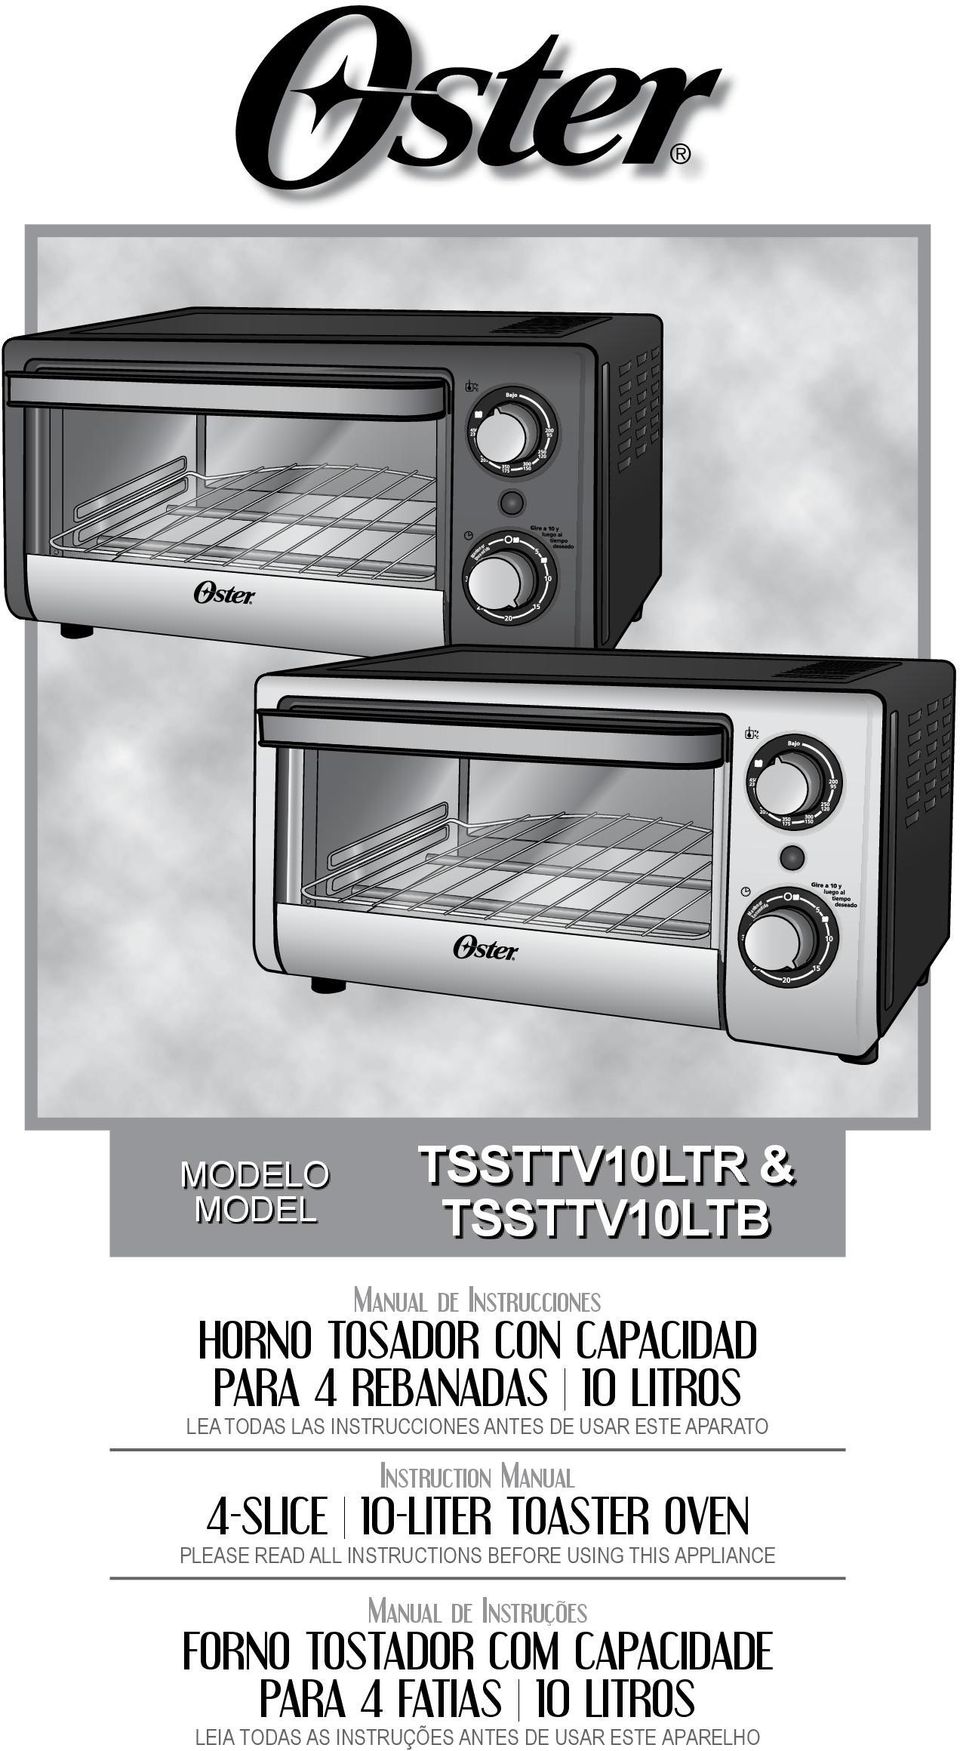 APARATO Instruction Manual 4-SLICE 10-LITER TOASTER OVEN PLEASE READ ALL INSTRUCTIONS BEFORE USING THIS APPLIANCE